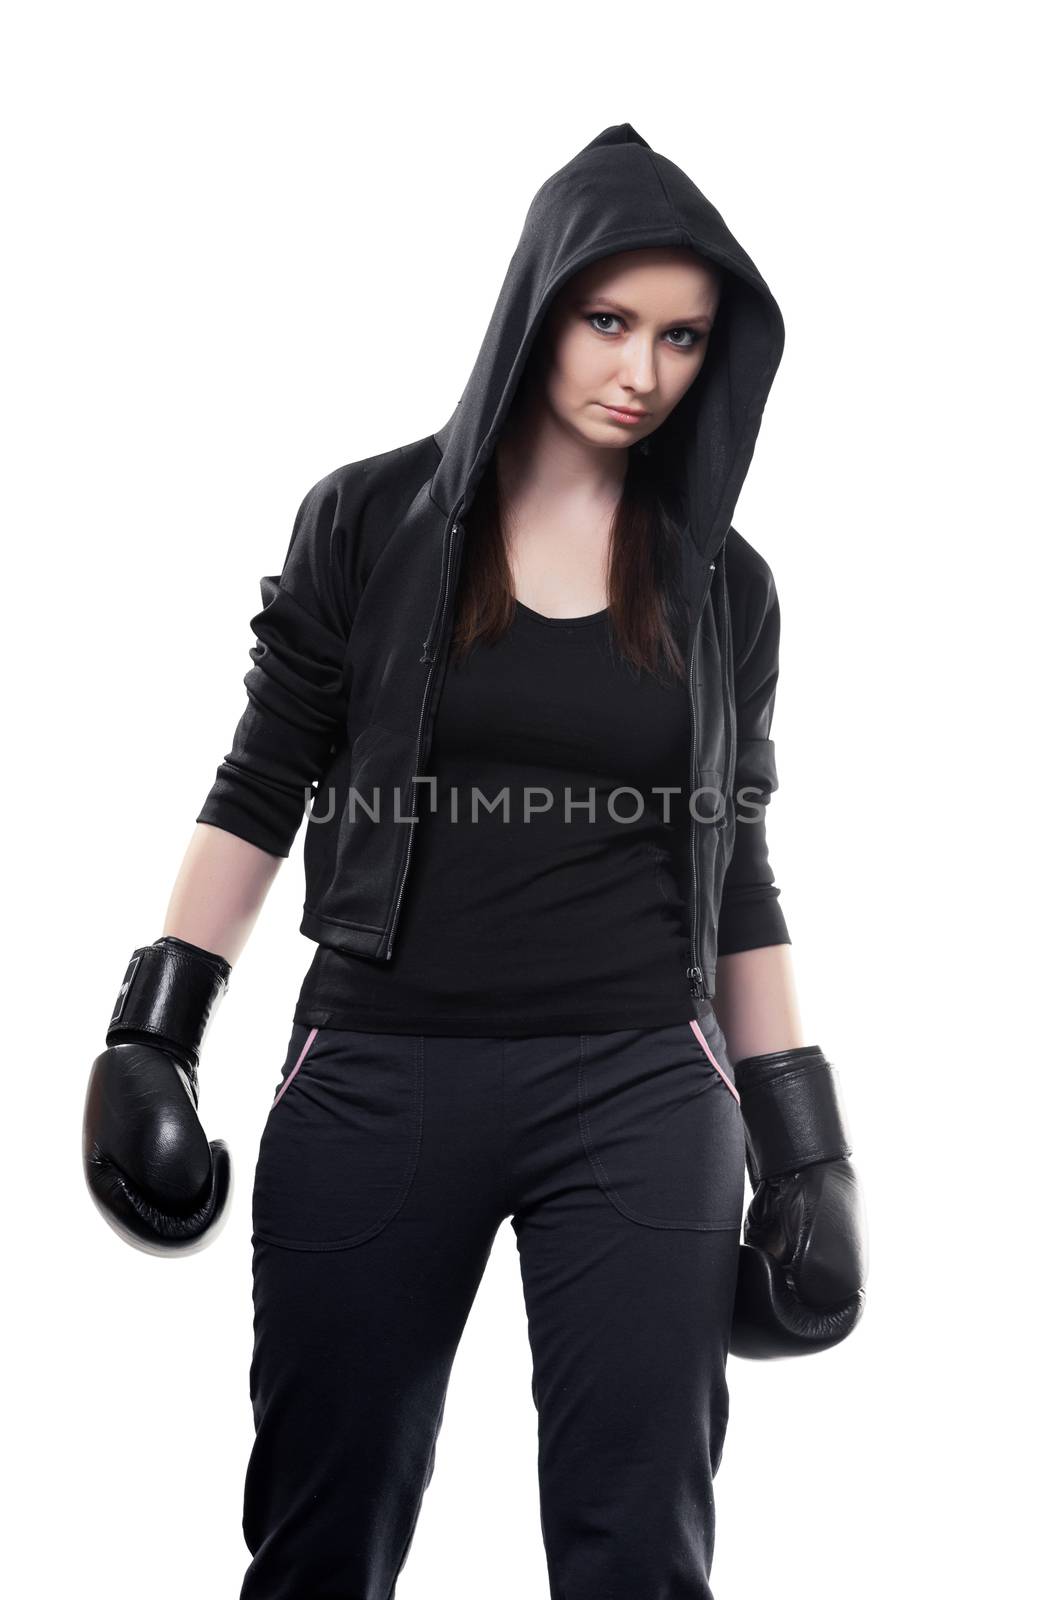 Young serious woman in boxing gloves on a white background